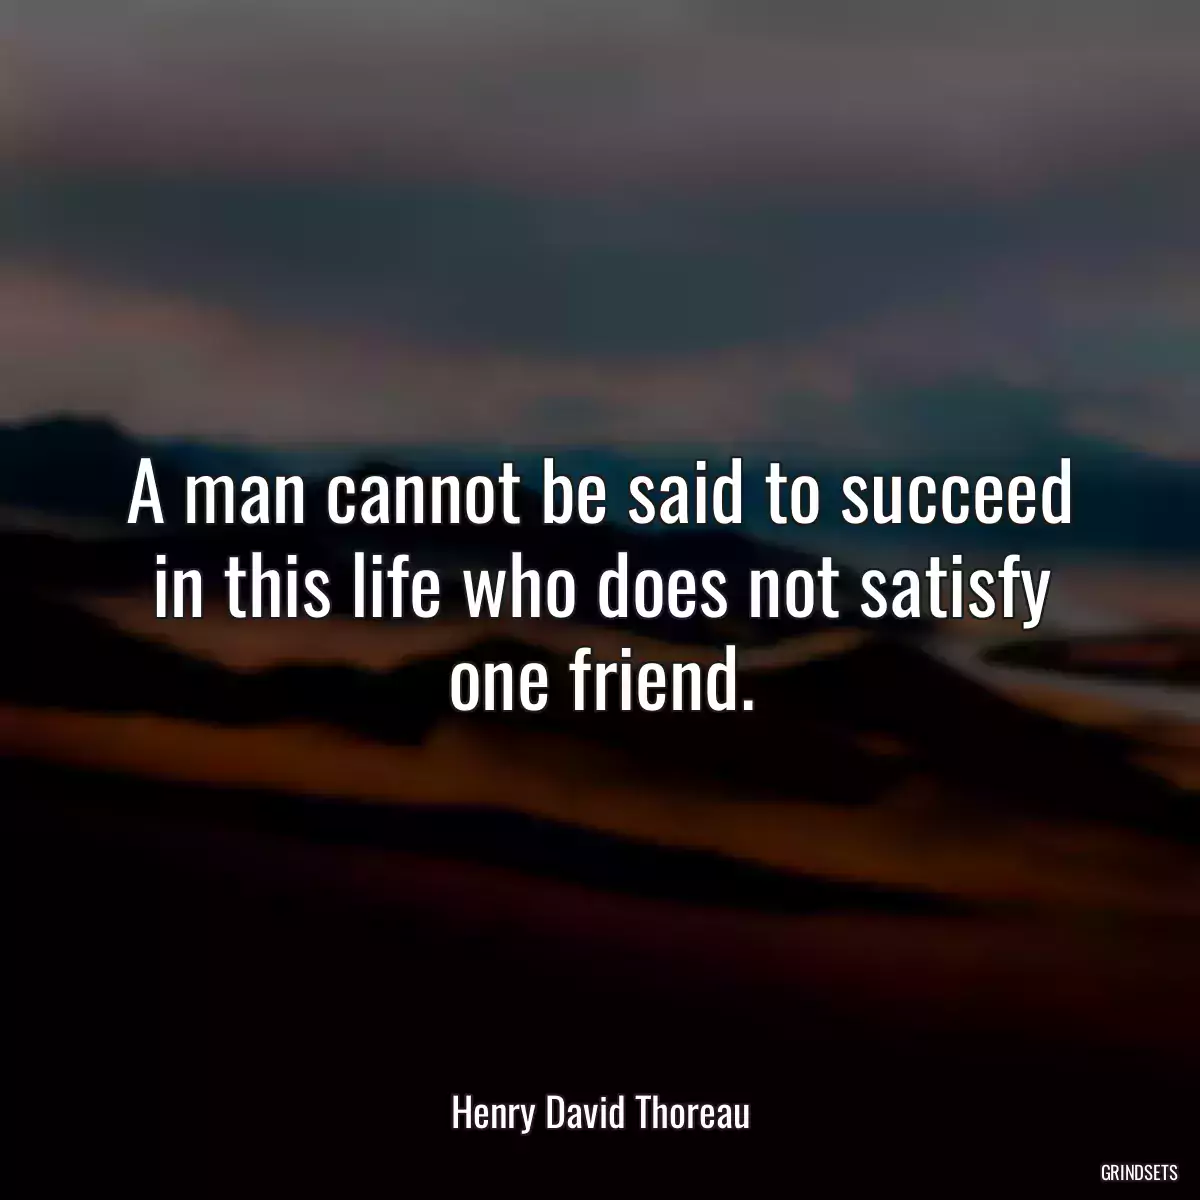 A man cannot be said to succeed in this life who does not satisfy one friend.